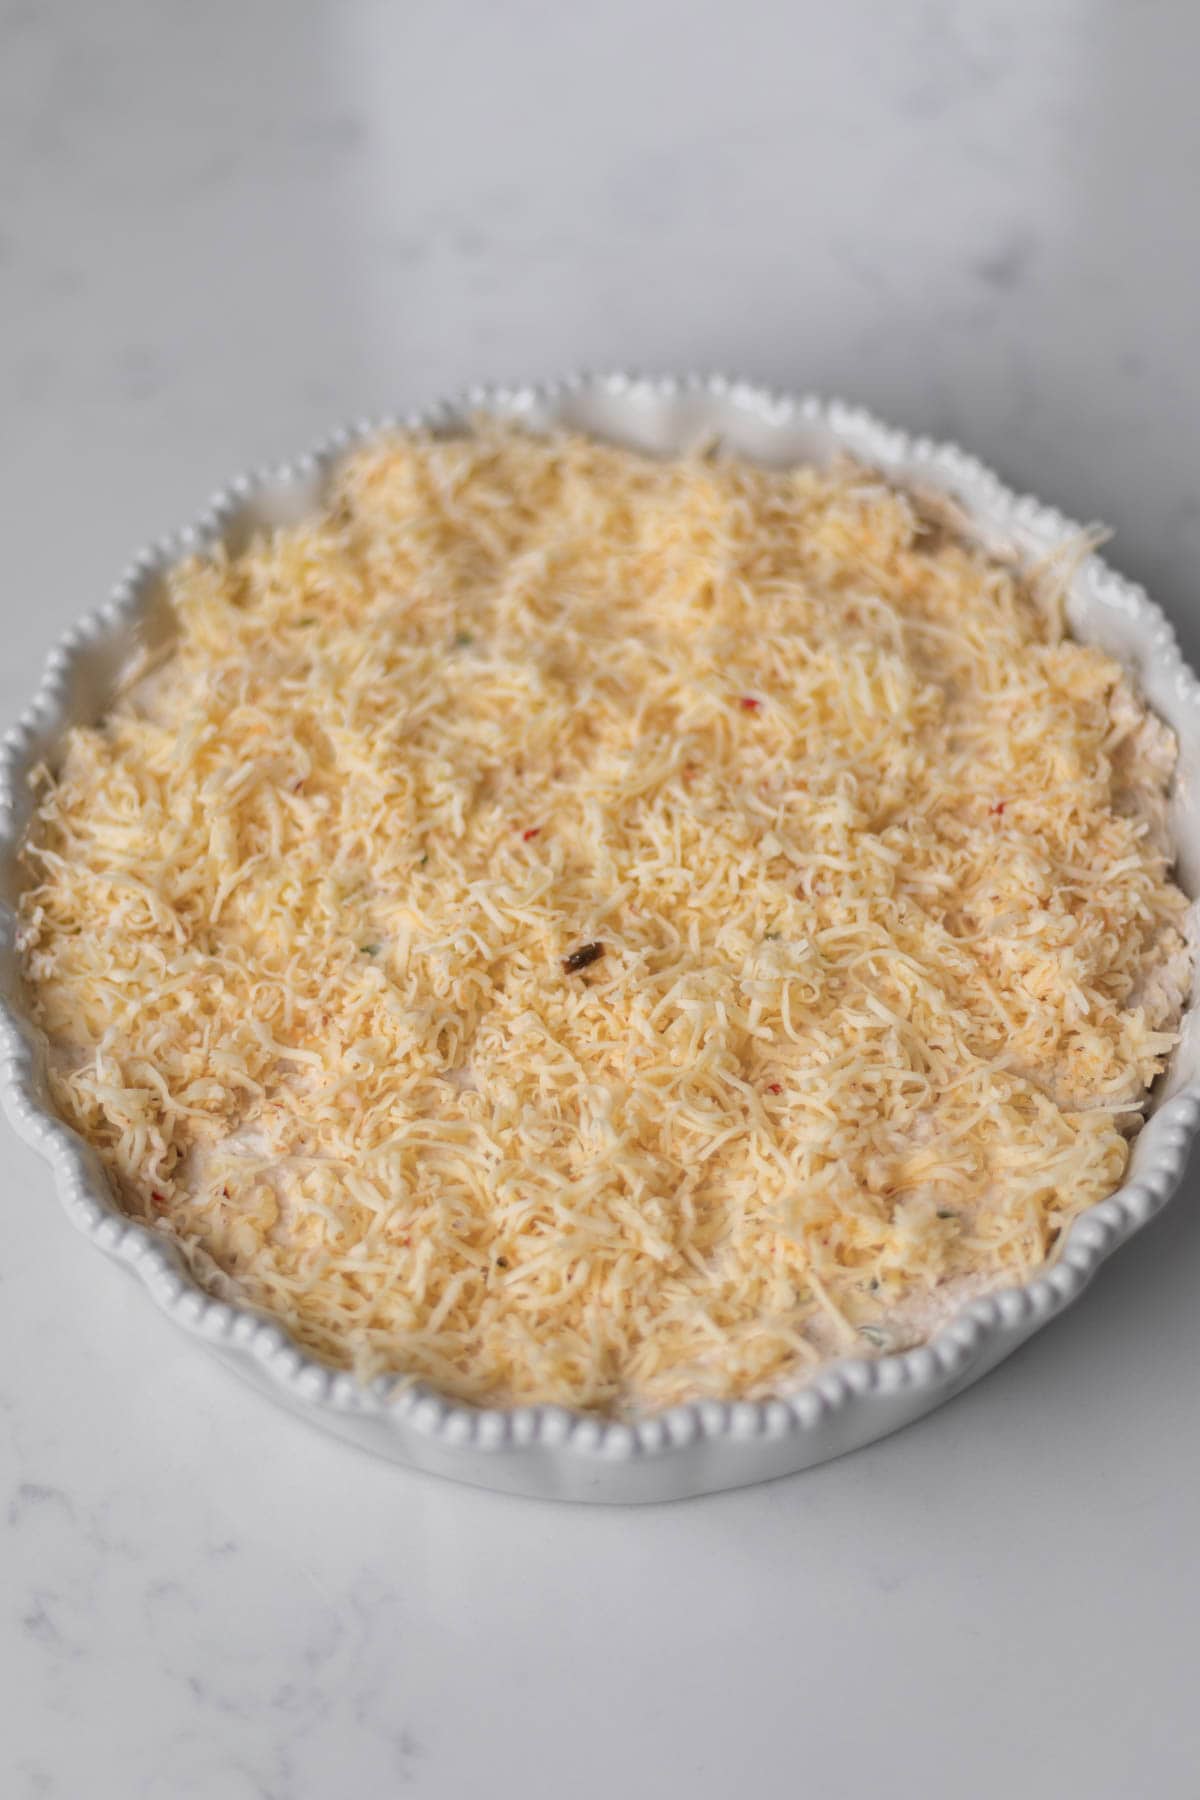 unbaked corn dip in a white tart pan topped with shredded pepperjack cheese